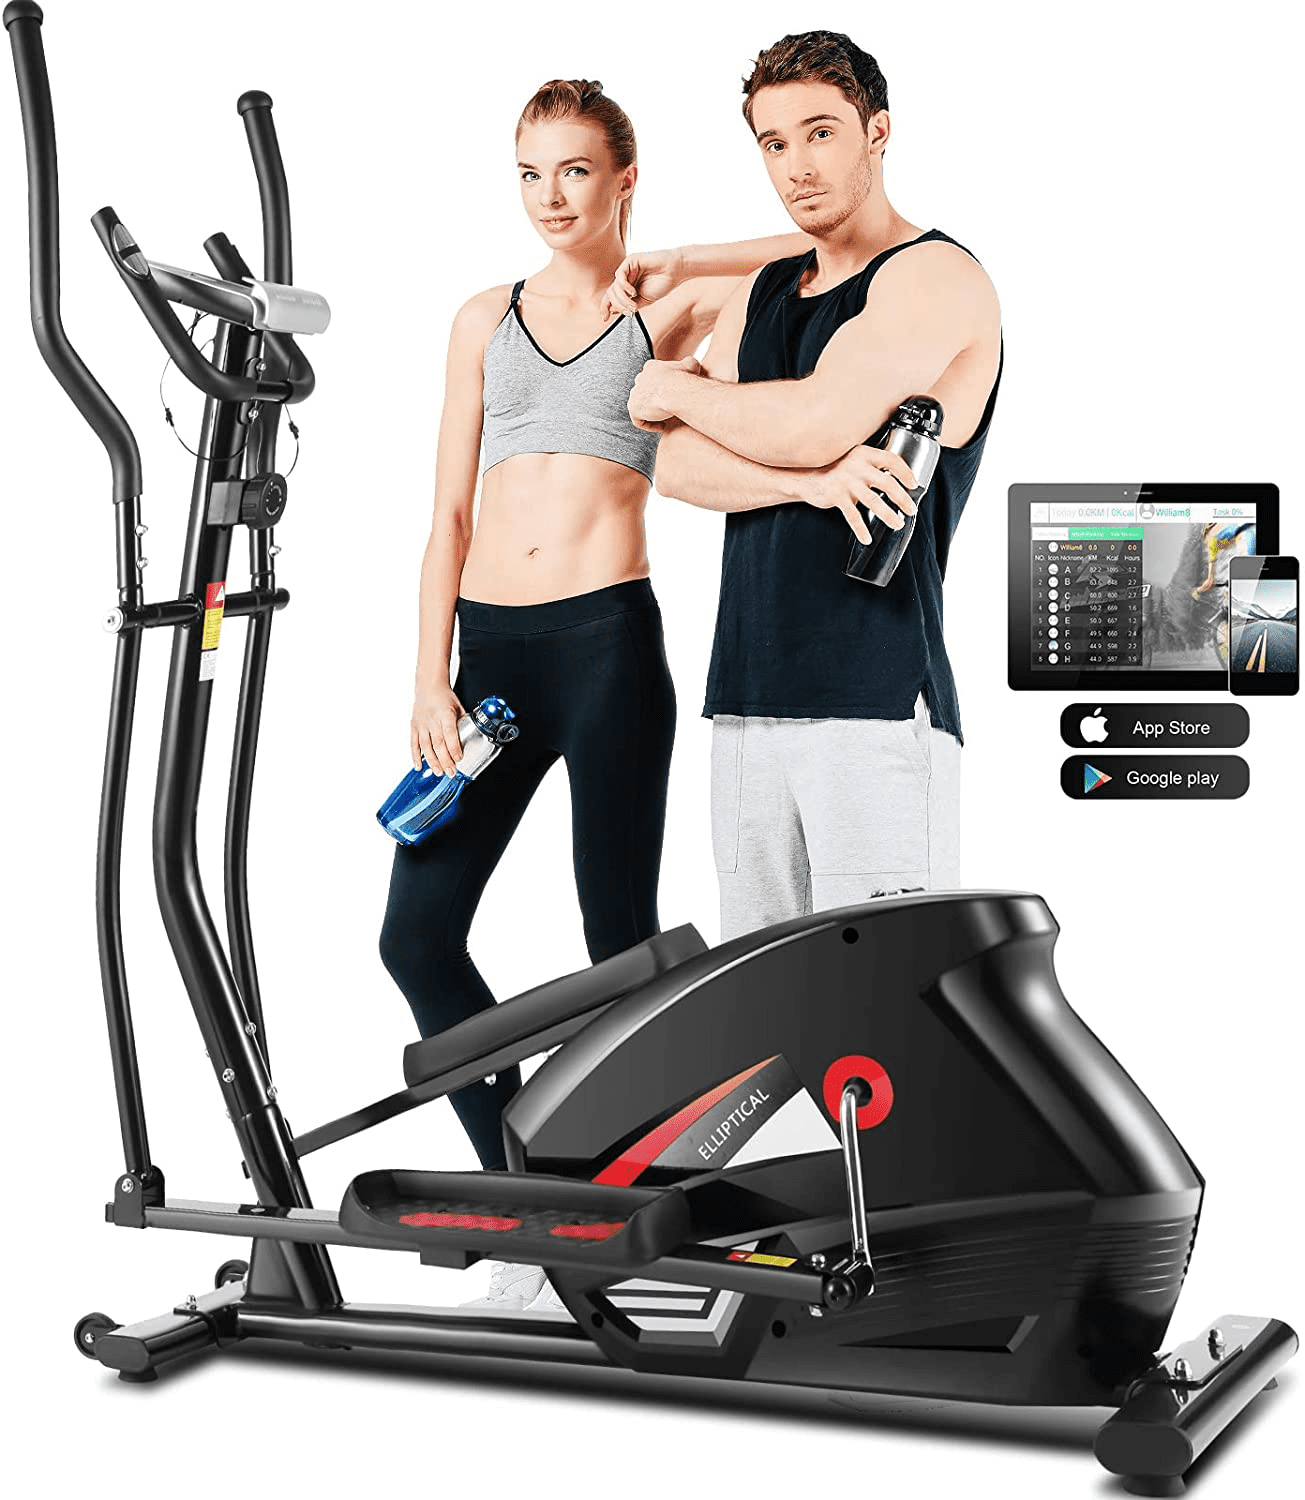 2022 Newest Magnetic Elliptical Machine for Home Use with Adjustable 10 Level Magnetic Resistance for Indoor Fitness Gym Workout Max Weight Capacity 390Lbs ANCHEER APP Elliptical Machine 